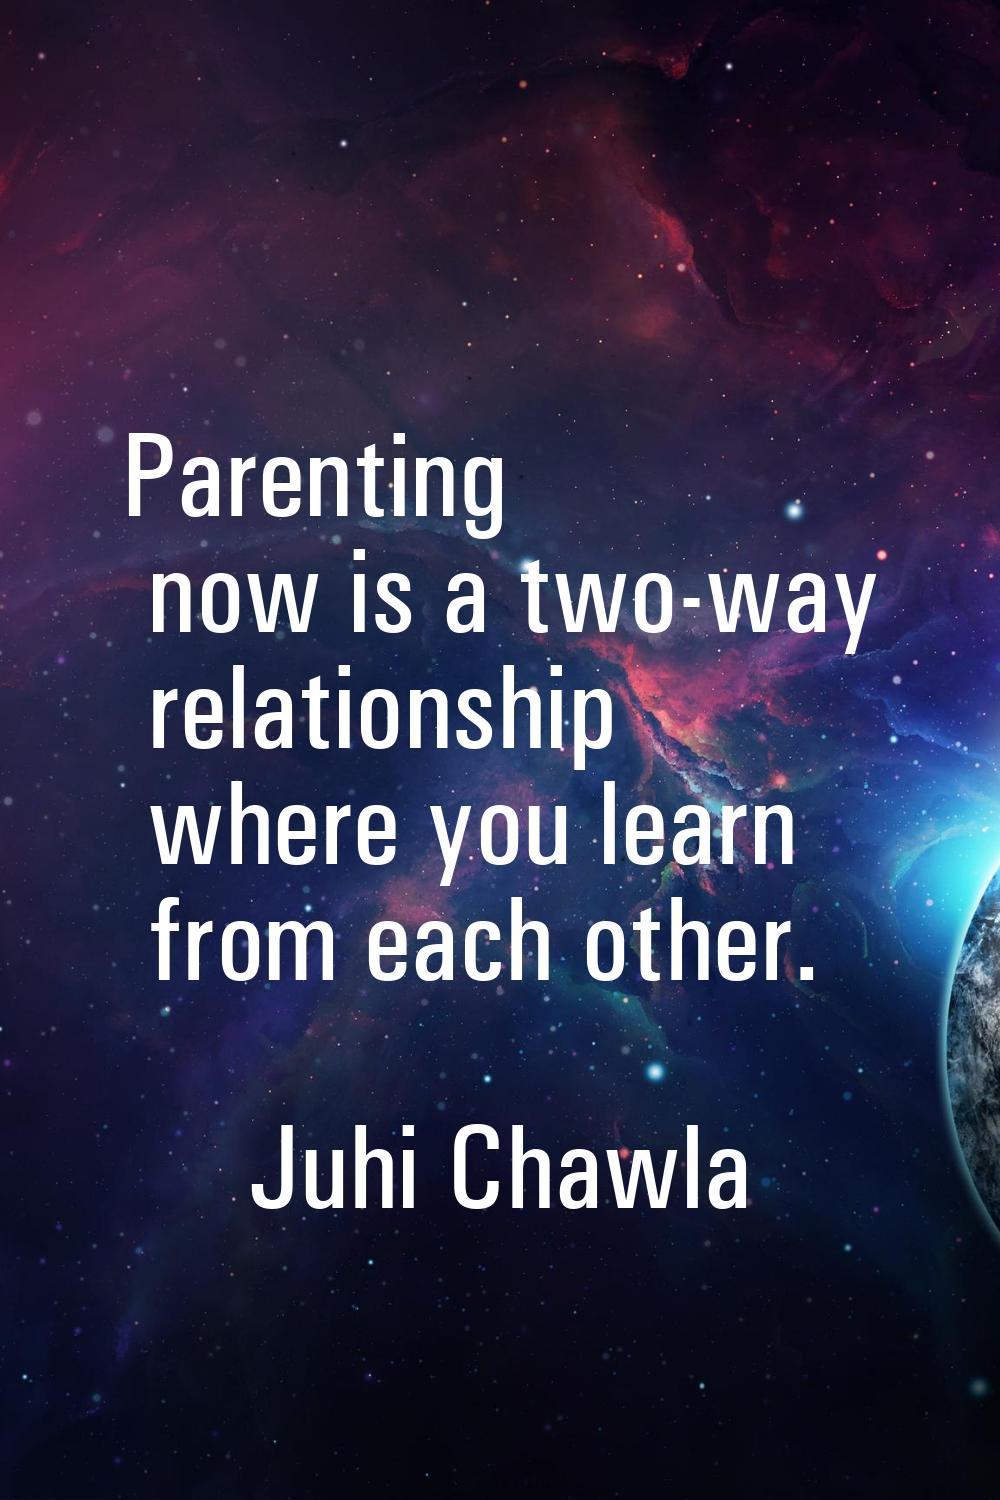 Parenting now is a two-way relationship where you learn from each other.